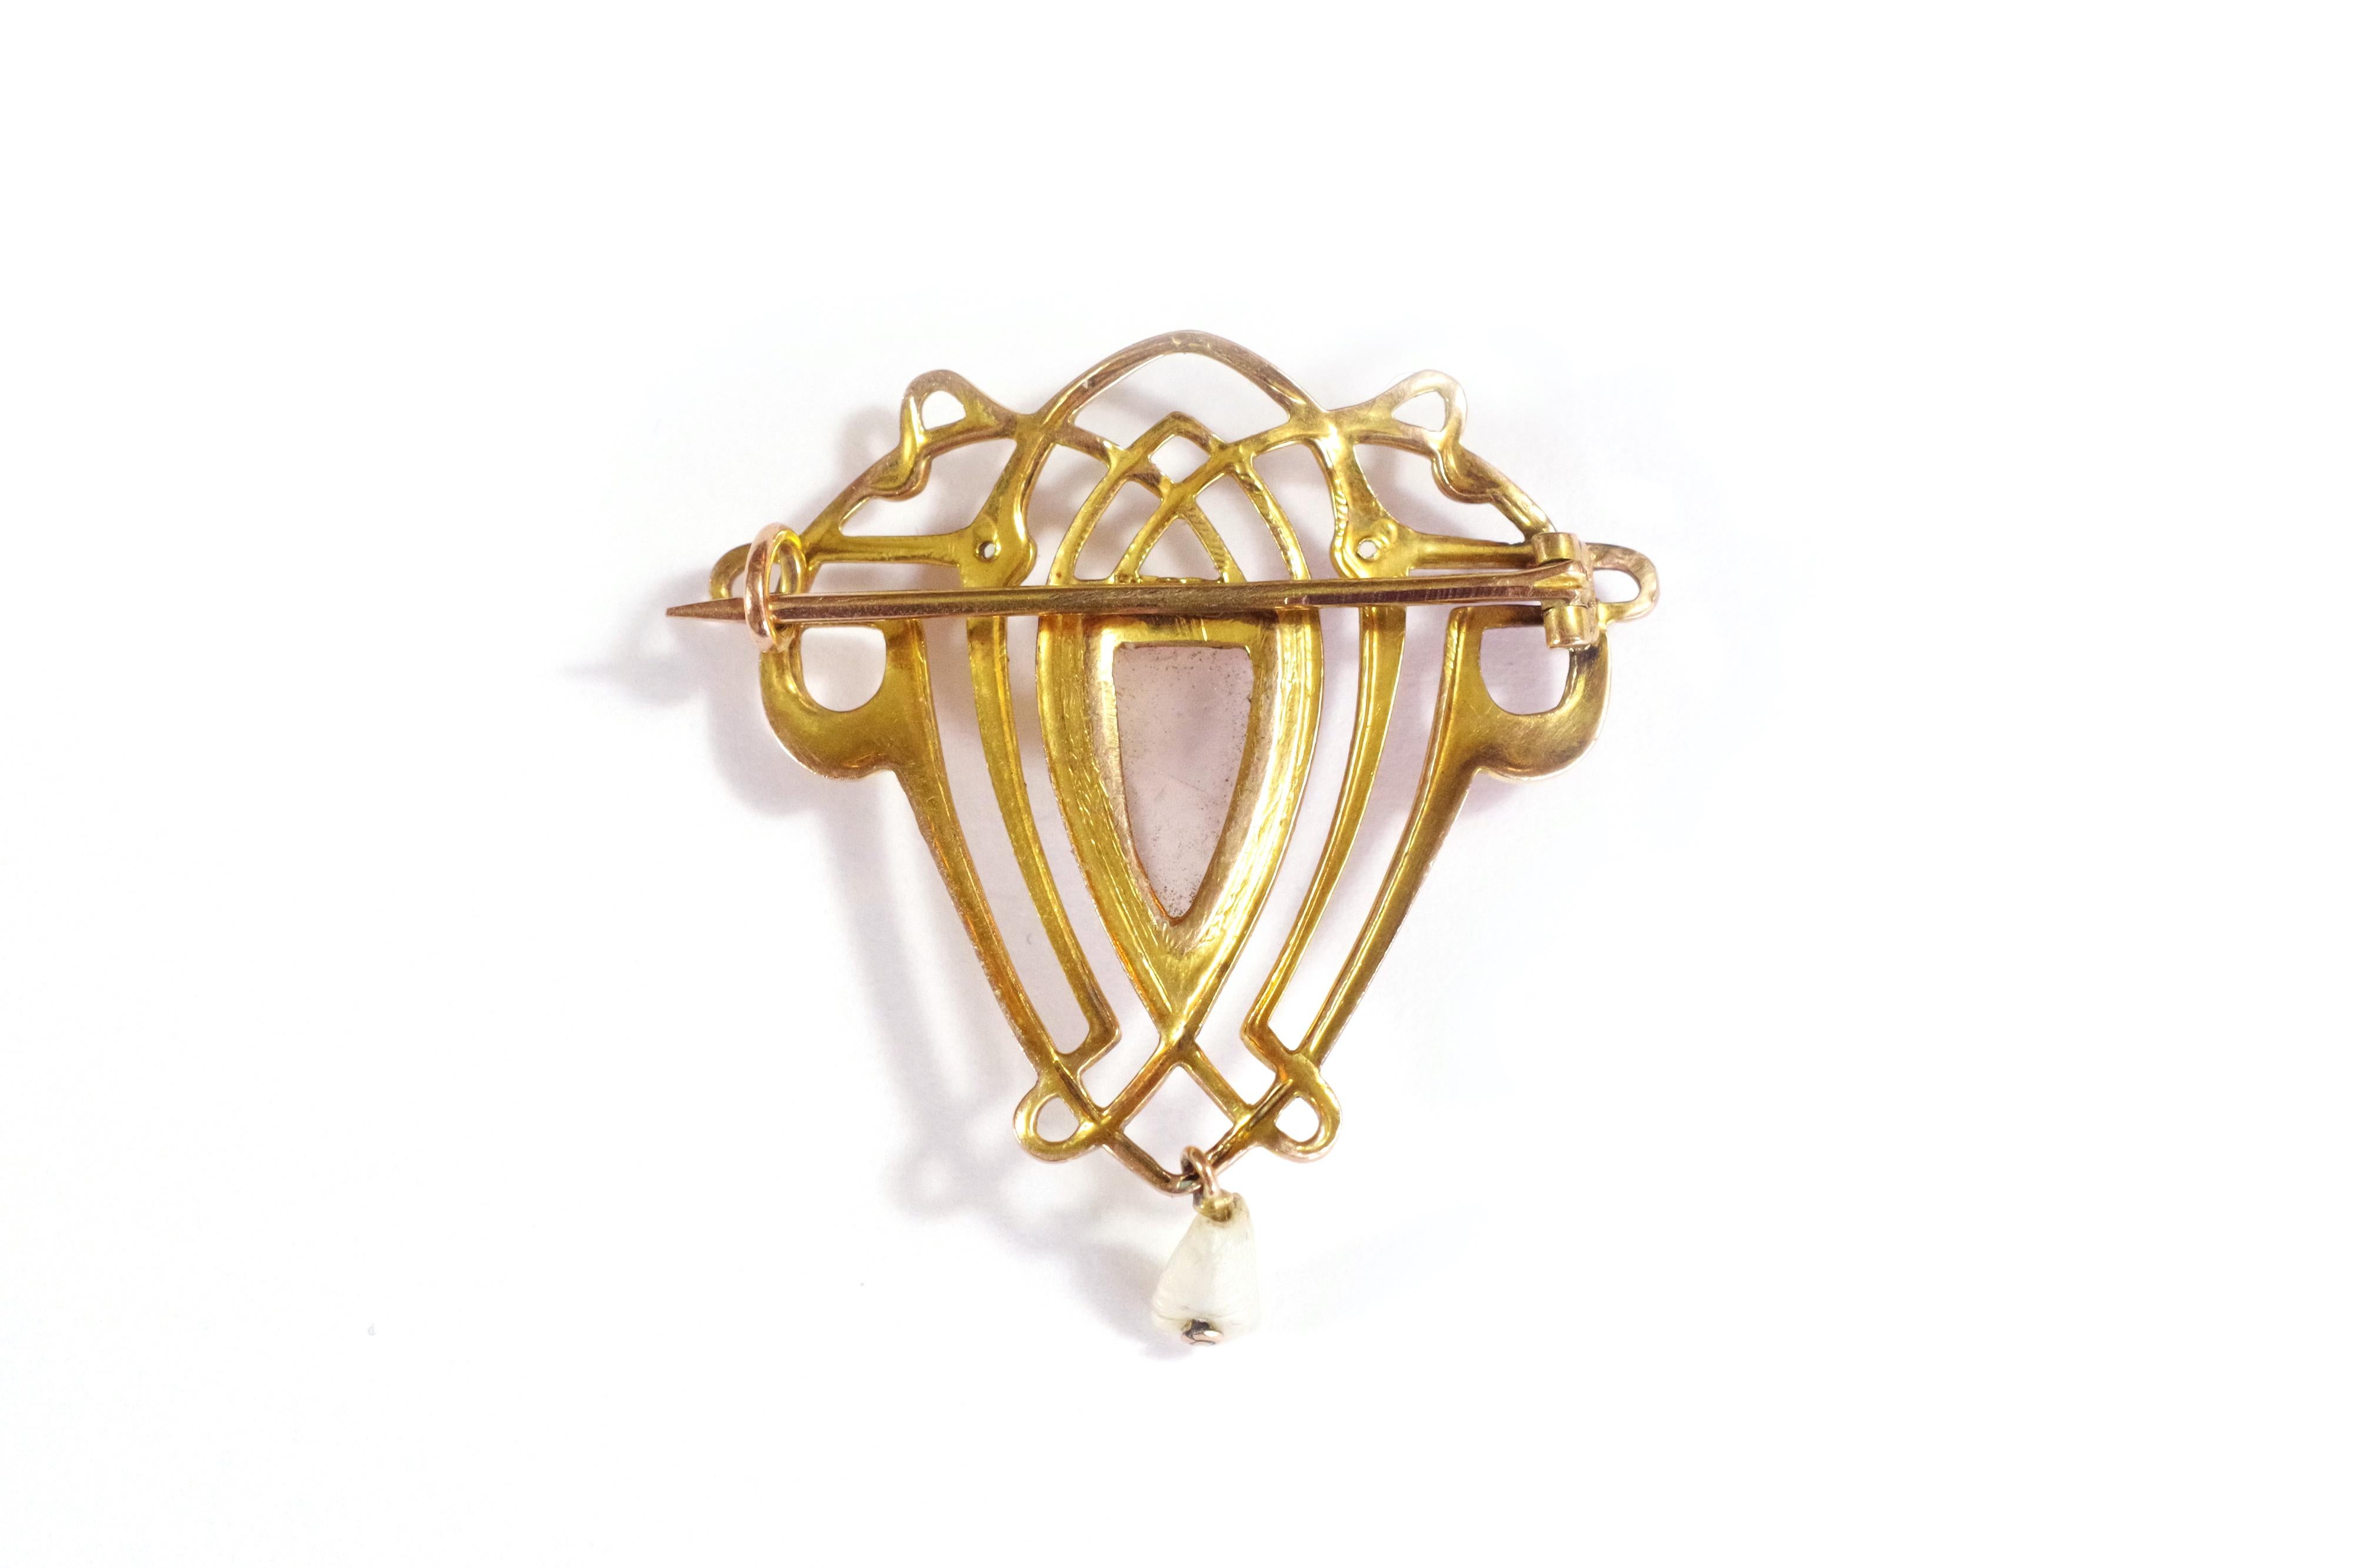 Arts & Crafts brooch by Barnet Henry Joseph (1865-1929), in rose and yellow 9 karat gold. The brooch has a triangular shape and is composed of openwork interlacing. It is a typical pattern of English Art Nouveau movement, also called Arts & Crafts.